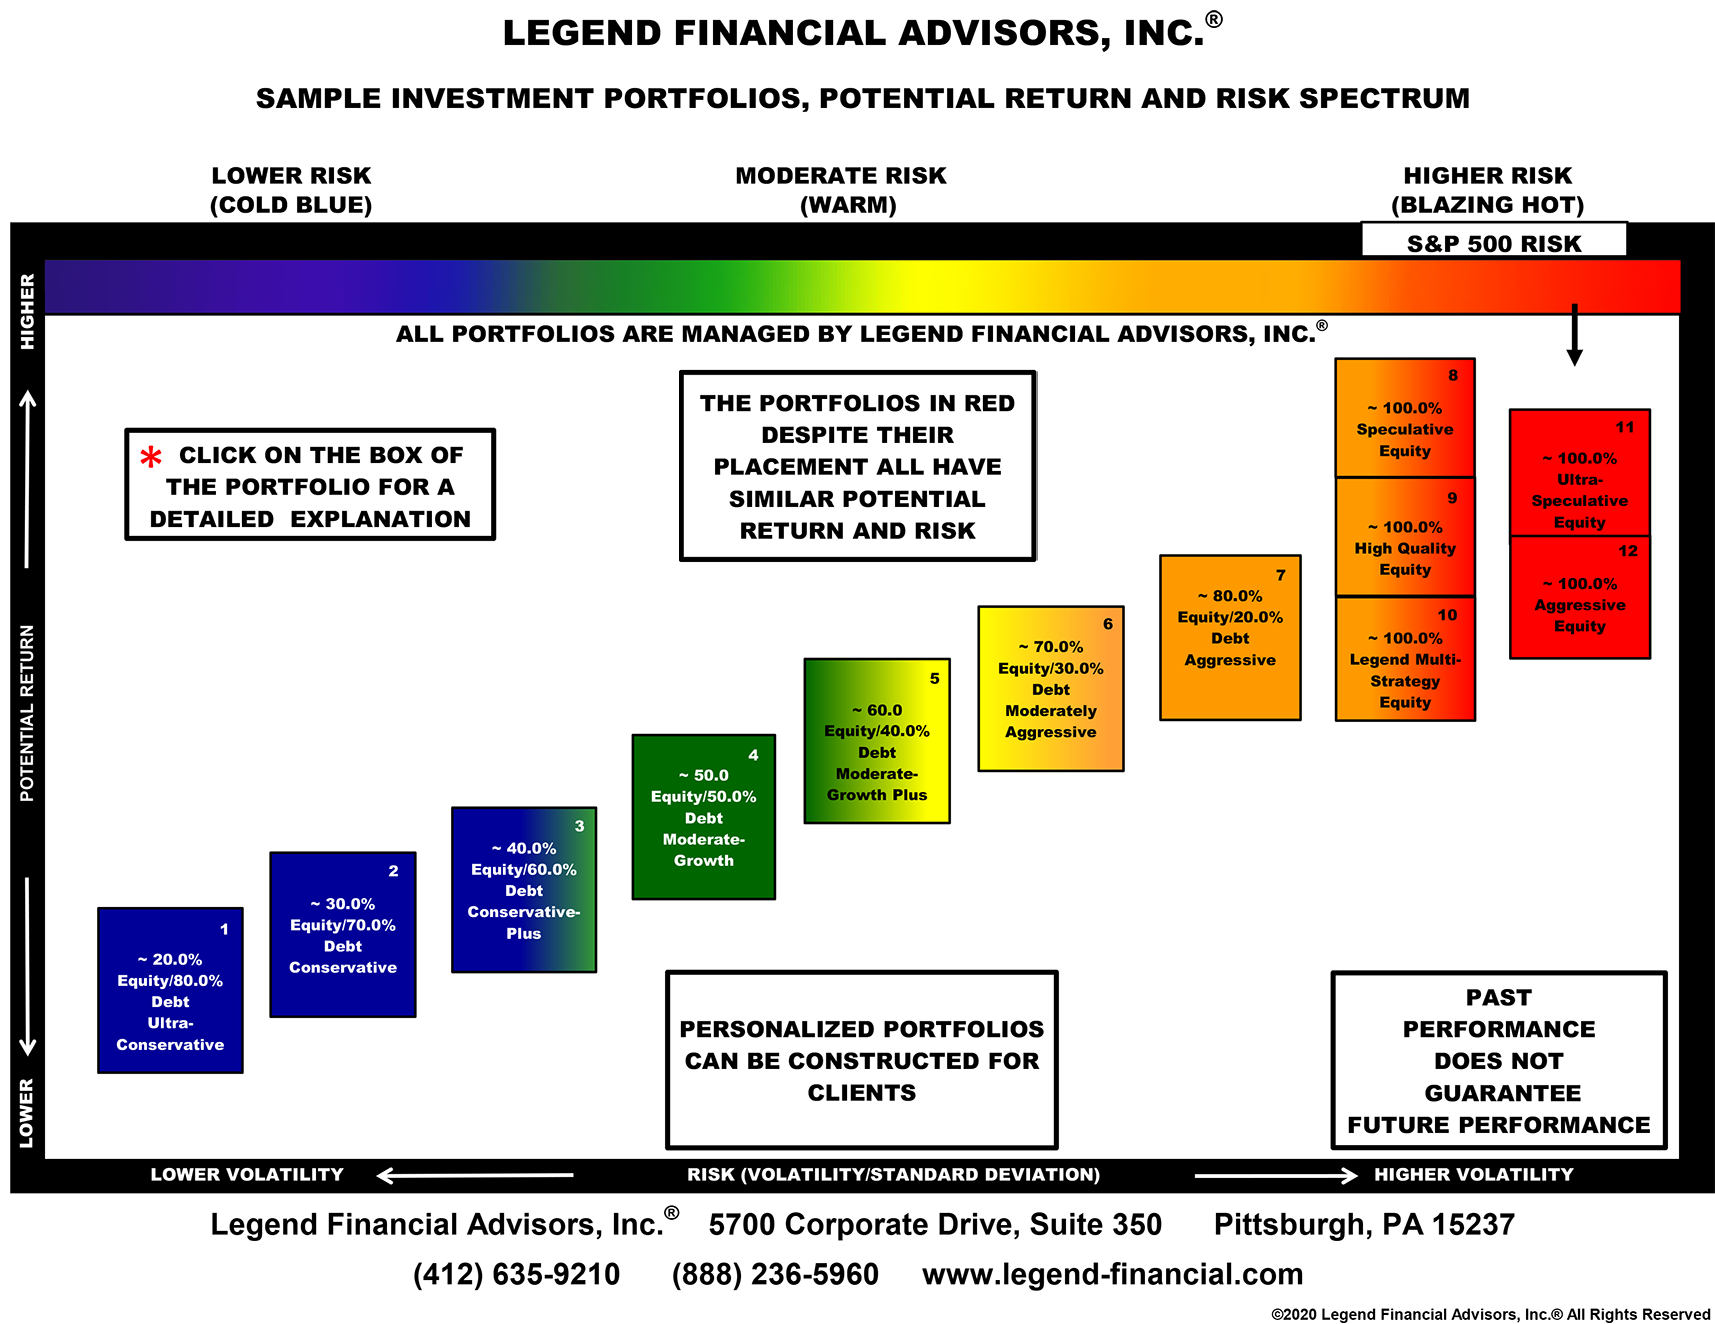 Risk Spectrum Chart: Sample Investment Portfolios, Potential Return and Risk Spectrum.  Lower Risk Portfolios are in Blue and Green color,  Moderate Risk Portfolios are in Green, Yellow and Orange colors,  Higher Risk Portfolios are in Orange and Red colors.